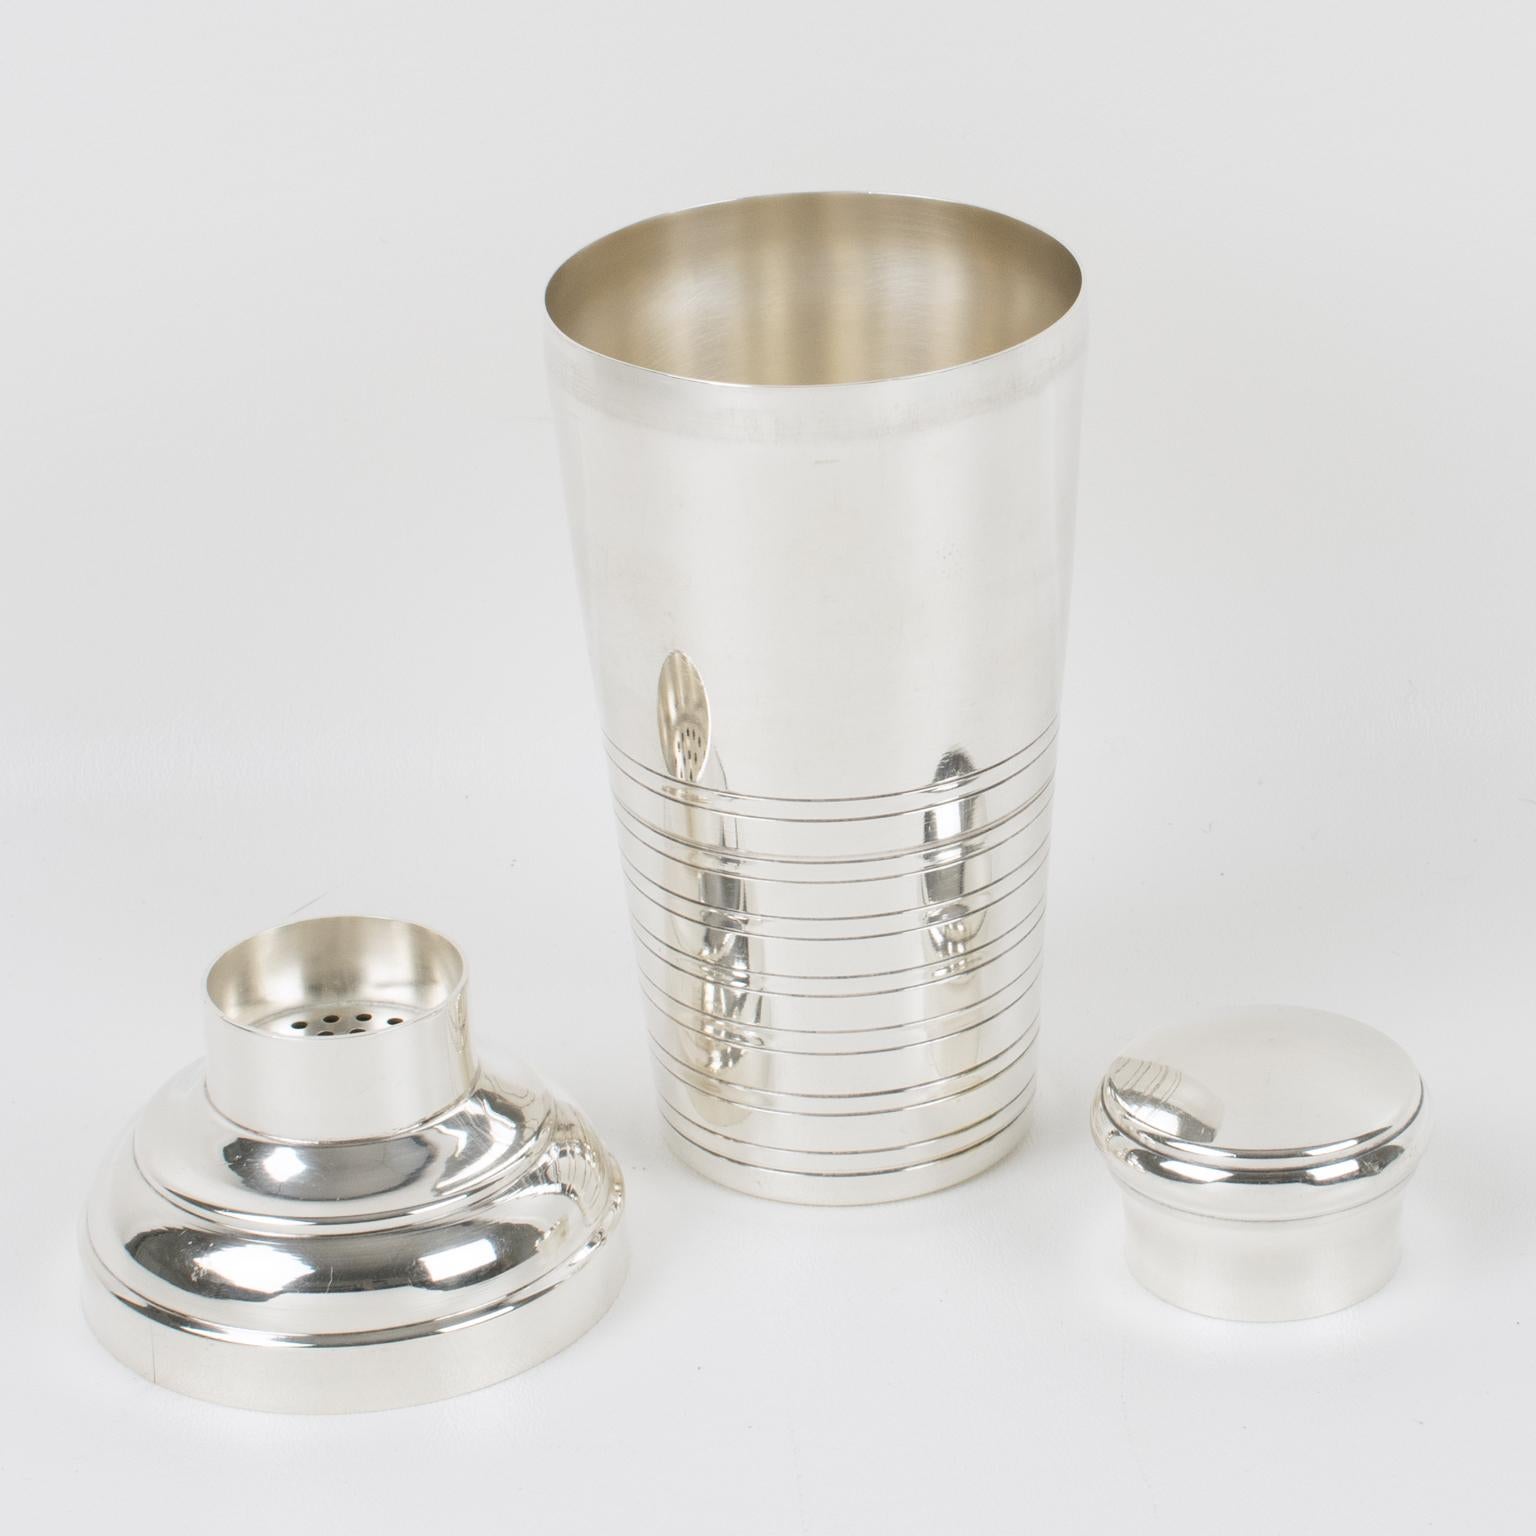 Lovely French Art Deco silver plate cylindrical cocktail or Martini shaker by silversmith Capargent, Paris. Three-sectioned designed cocktail shaker with removable cap and strainer. Geometric shape with typical Deco design around the base. Marked